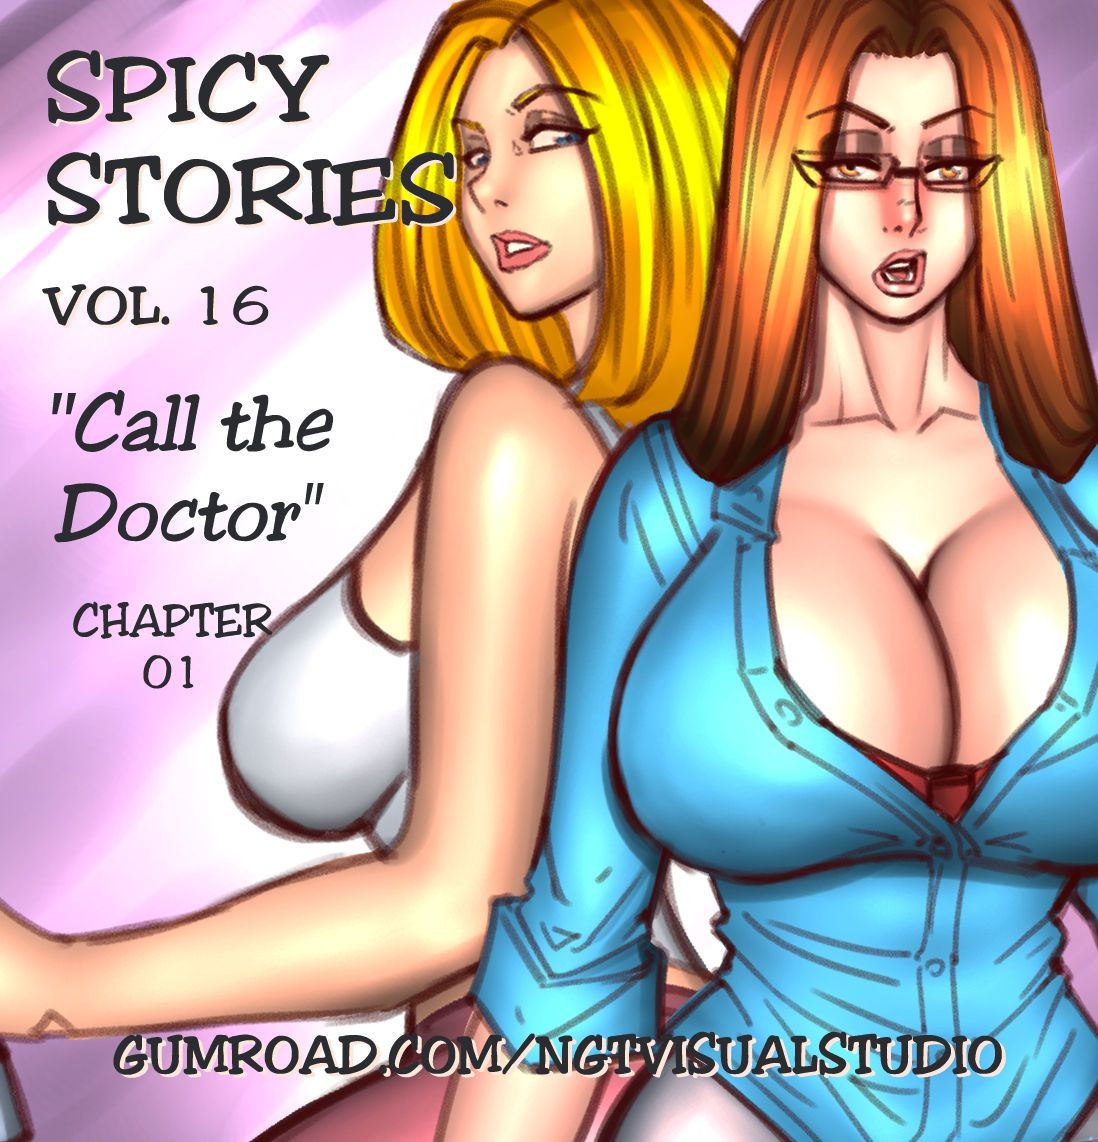 Amature NGT Spicy Stories 16 - Call The Doctor (Ongoing) NGT Spicy Stories 16 - Call The Doctor (Ongoing) Cums